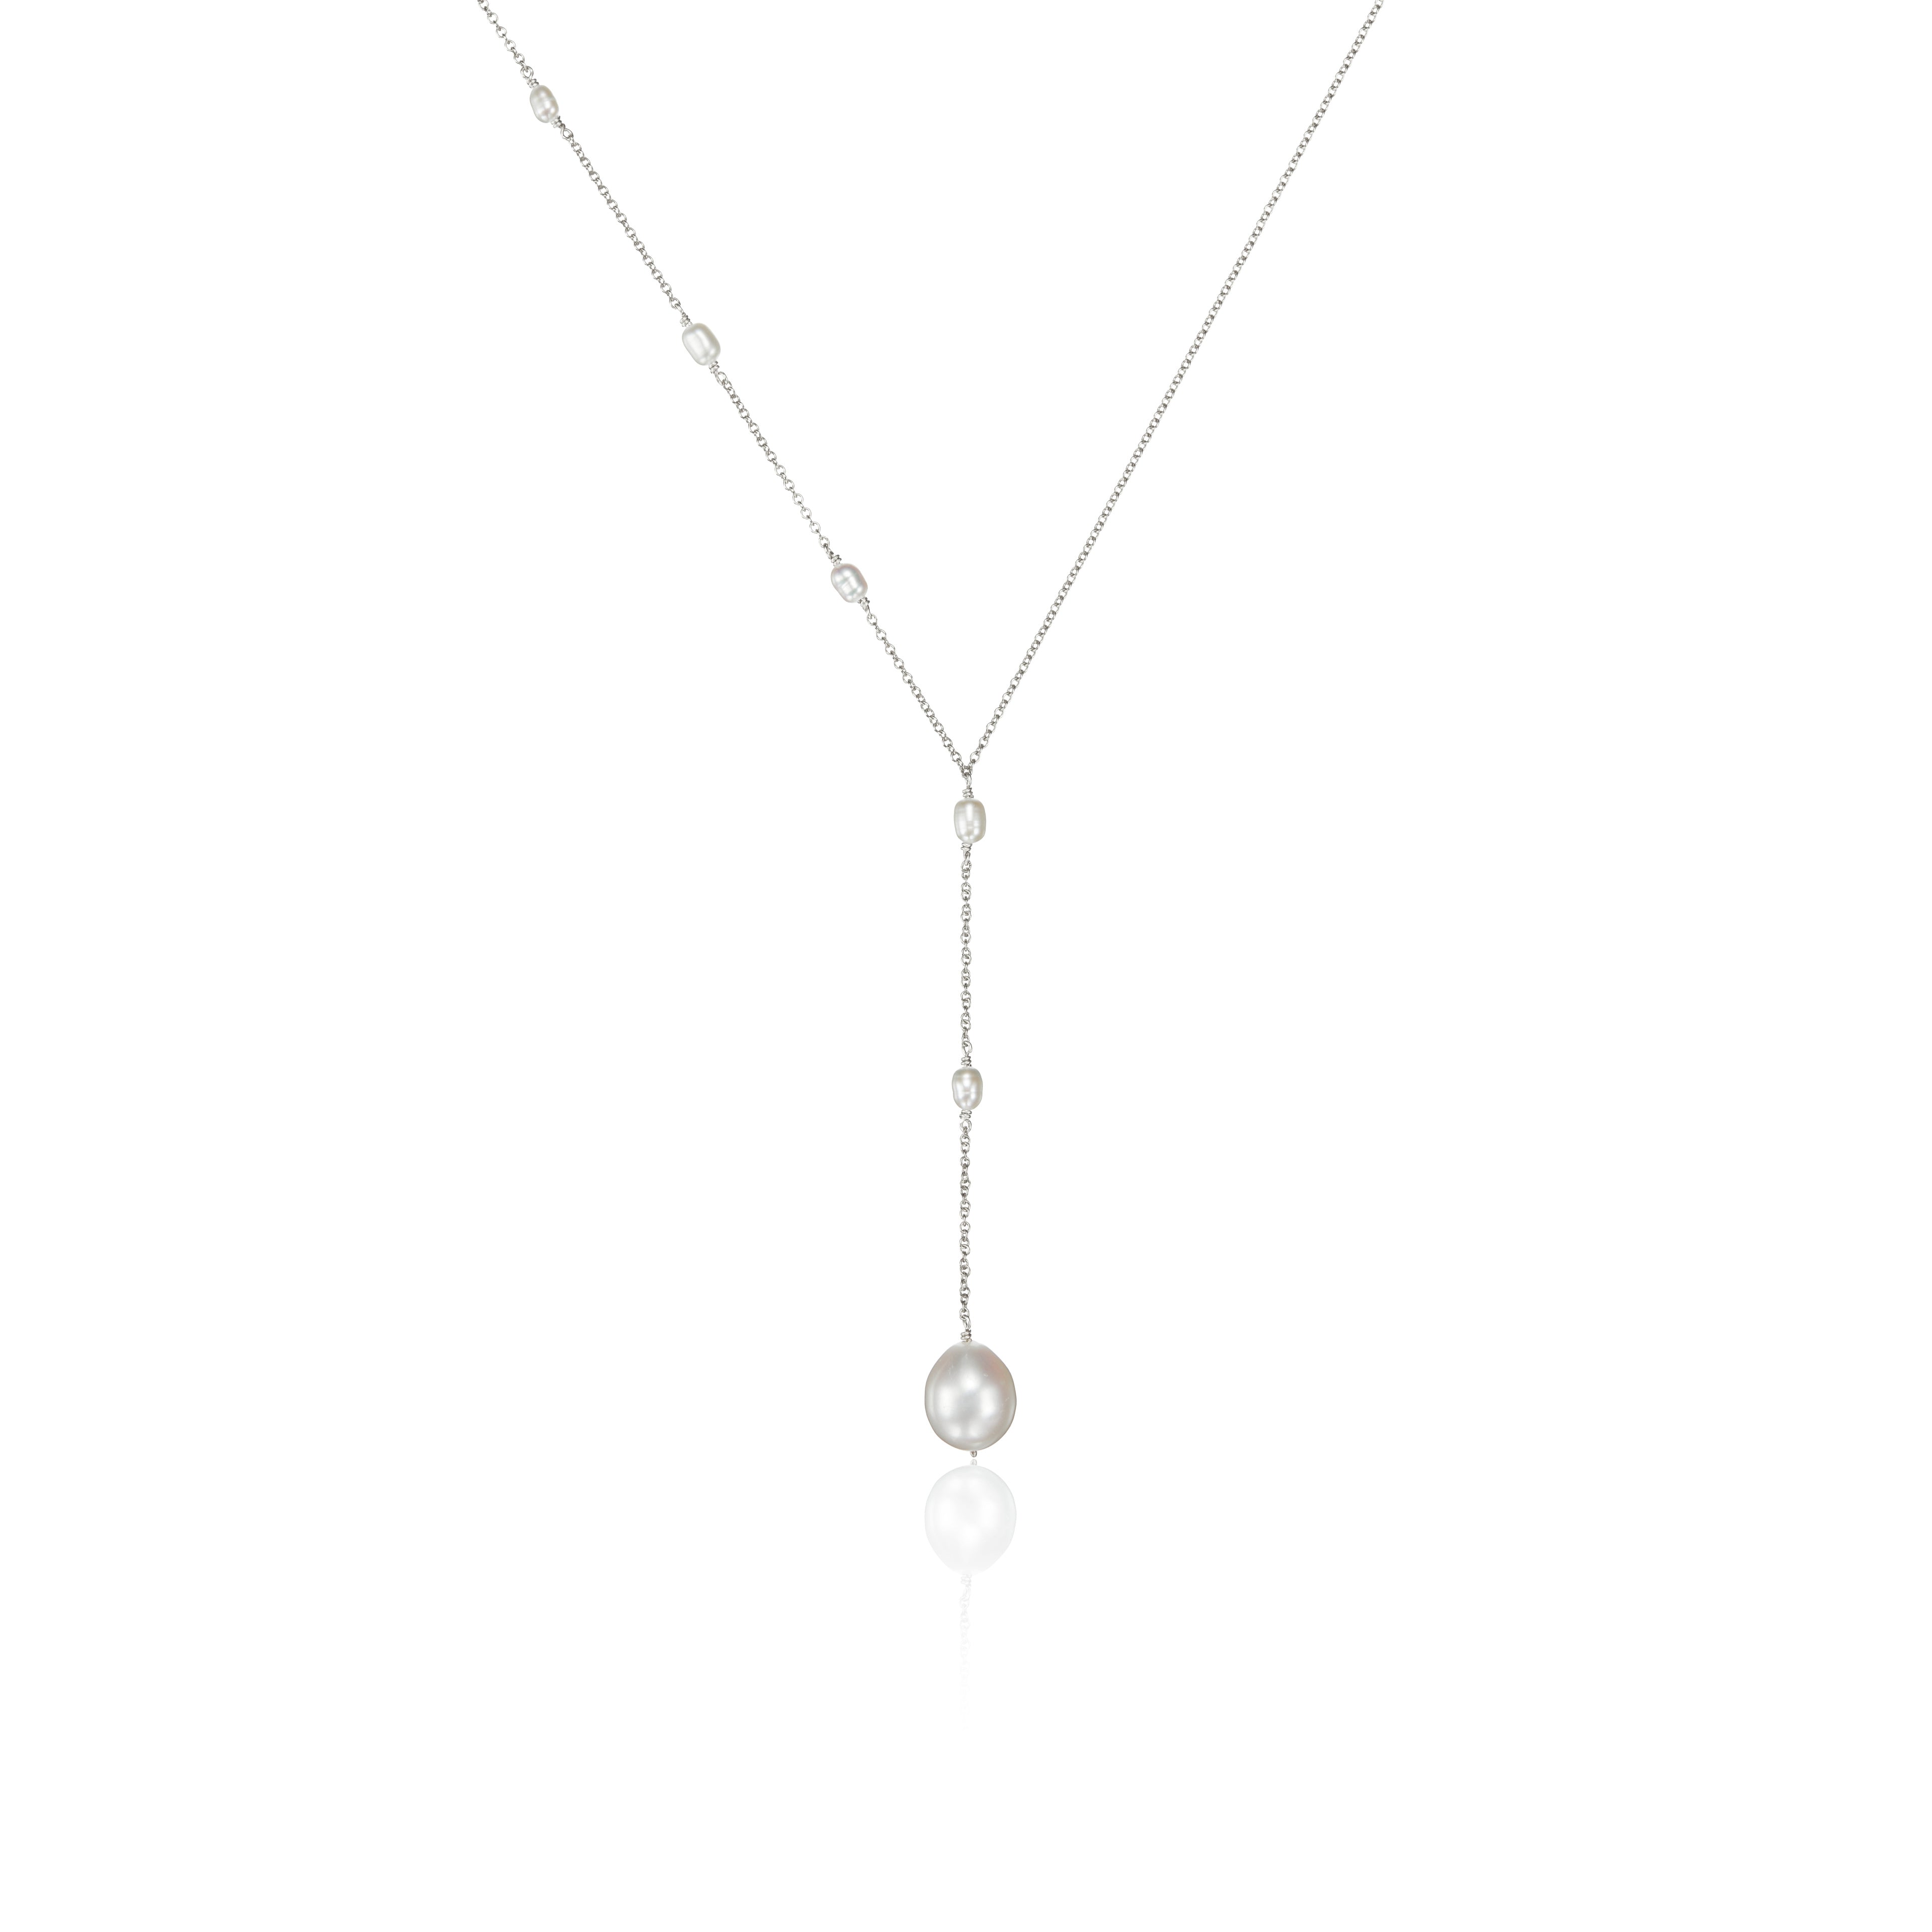 Silver seed pearl lariat necklace on a white background